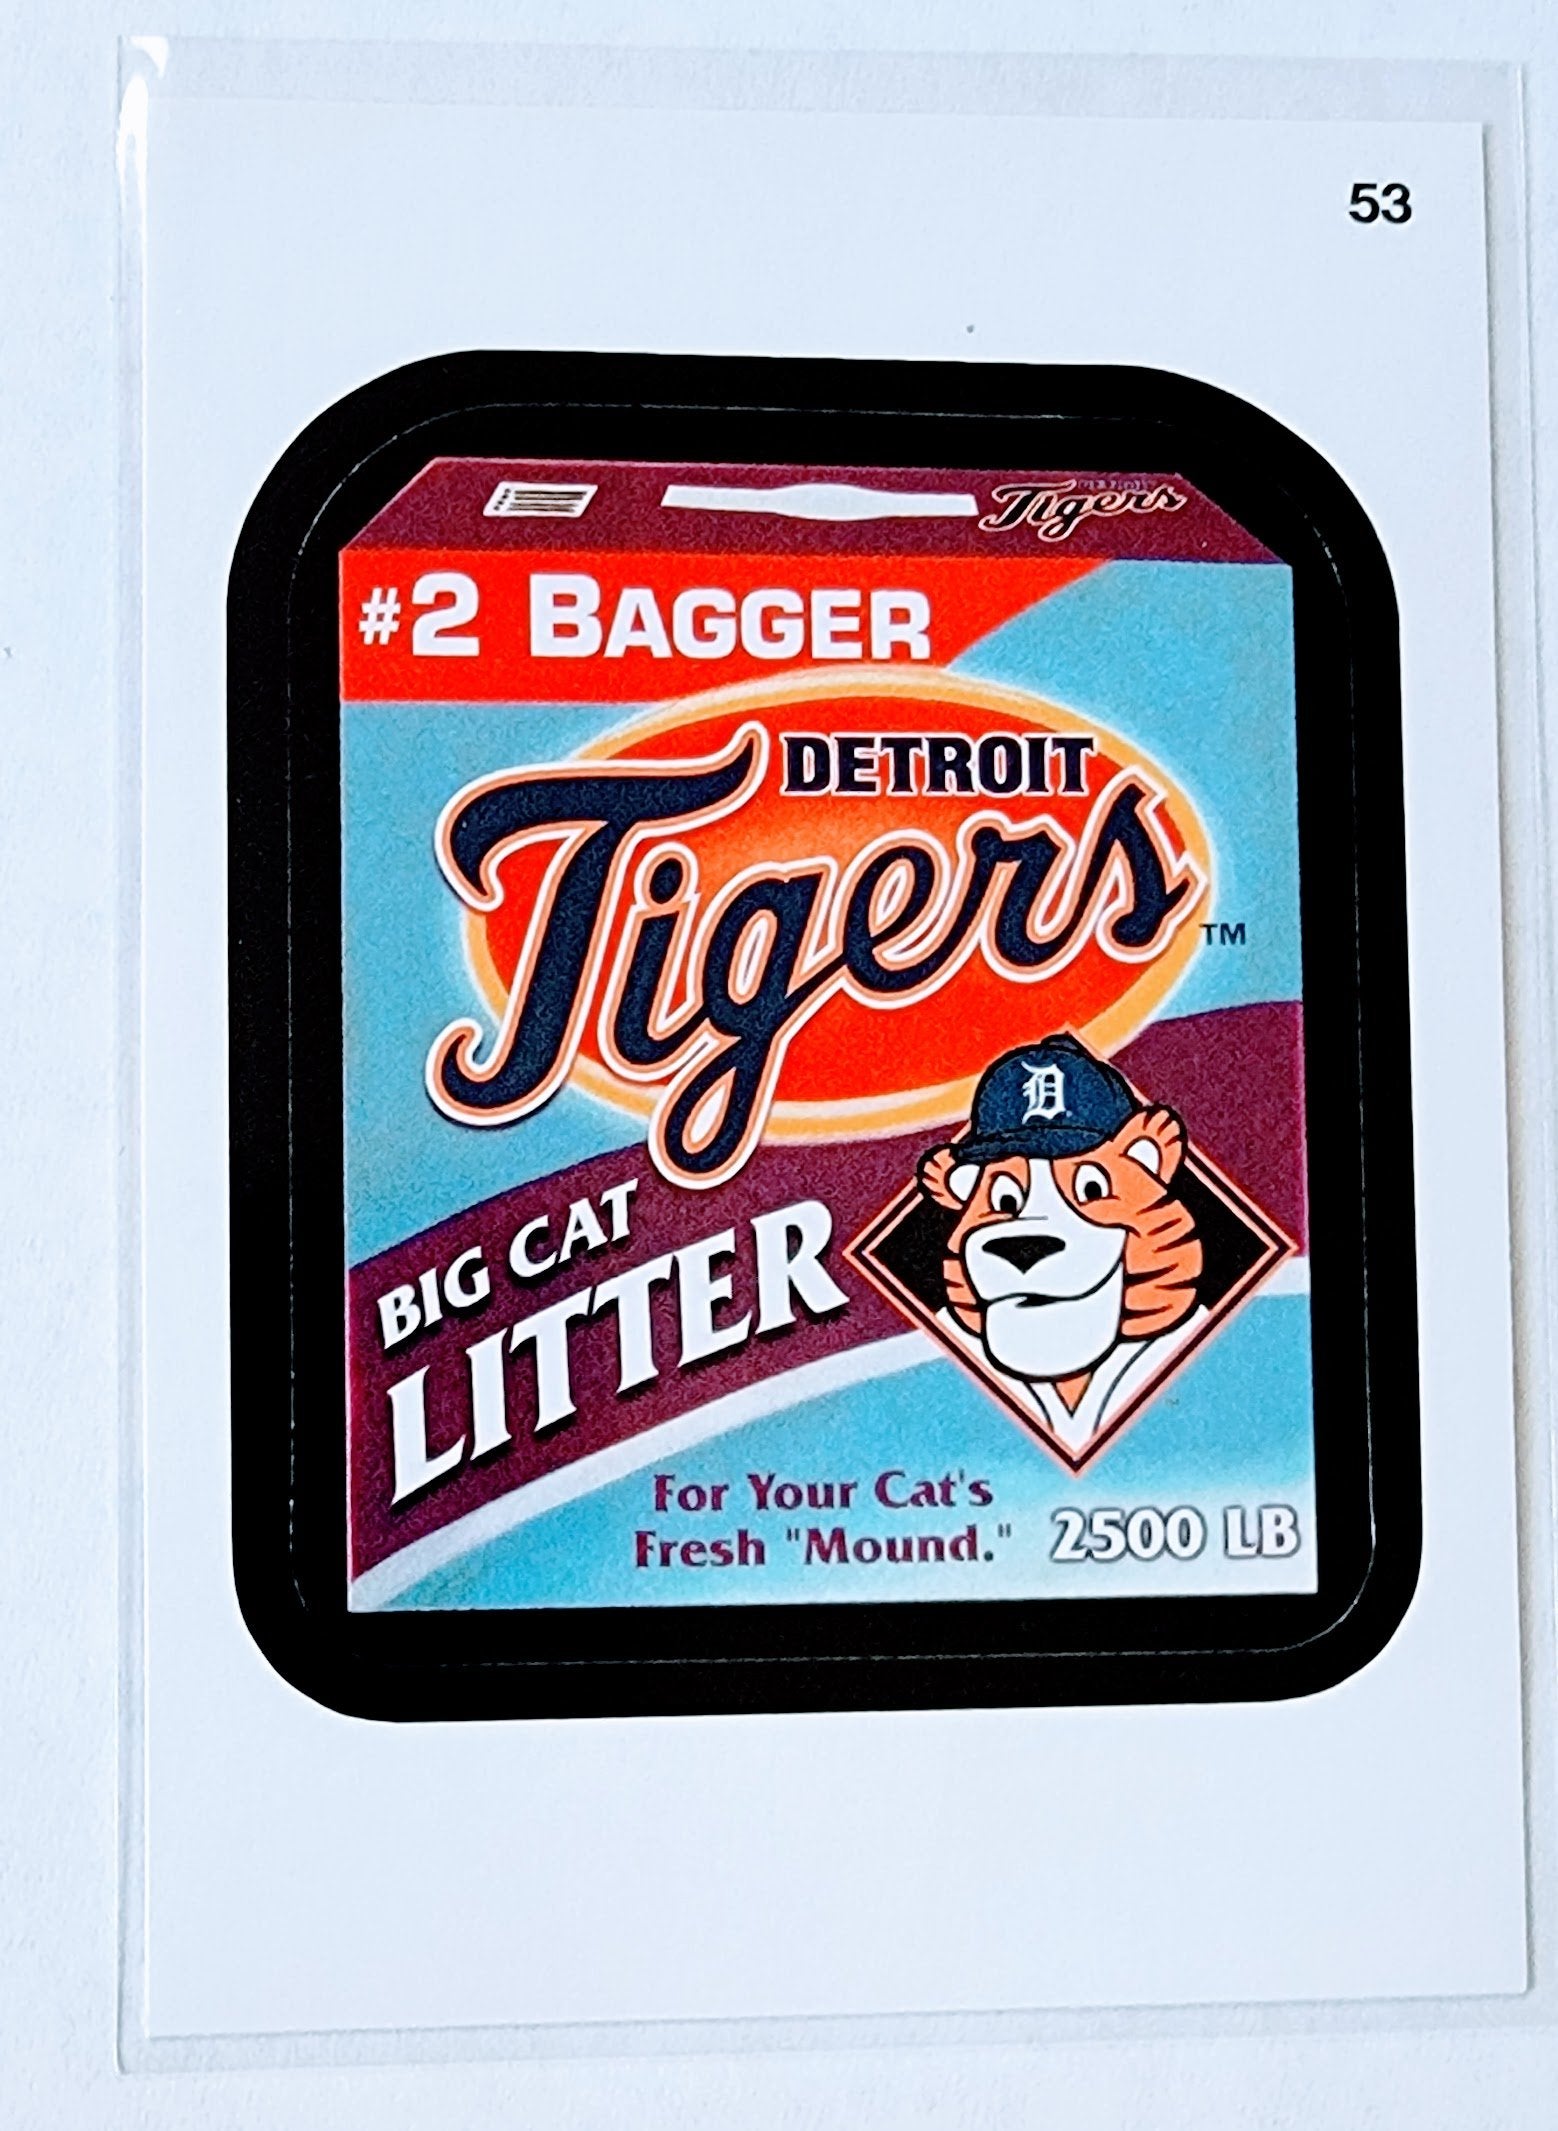 2016 Topps MLB Baseball Wacky Packages Detroit Tigers Big Cat Litter Sticker Trading Card MCSC1 simple Xclusive Collectibles   